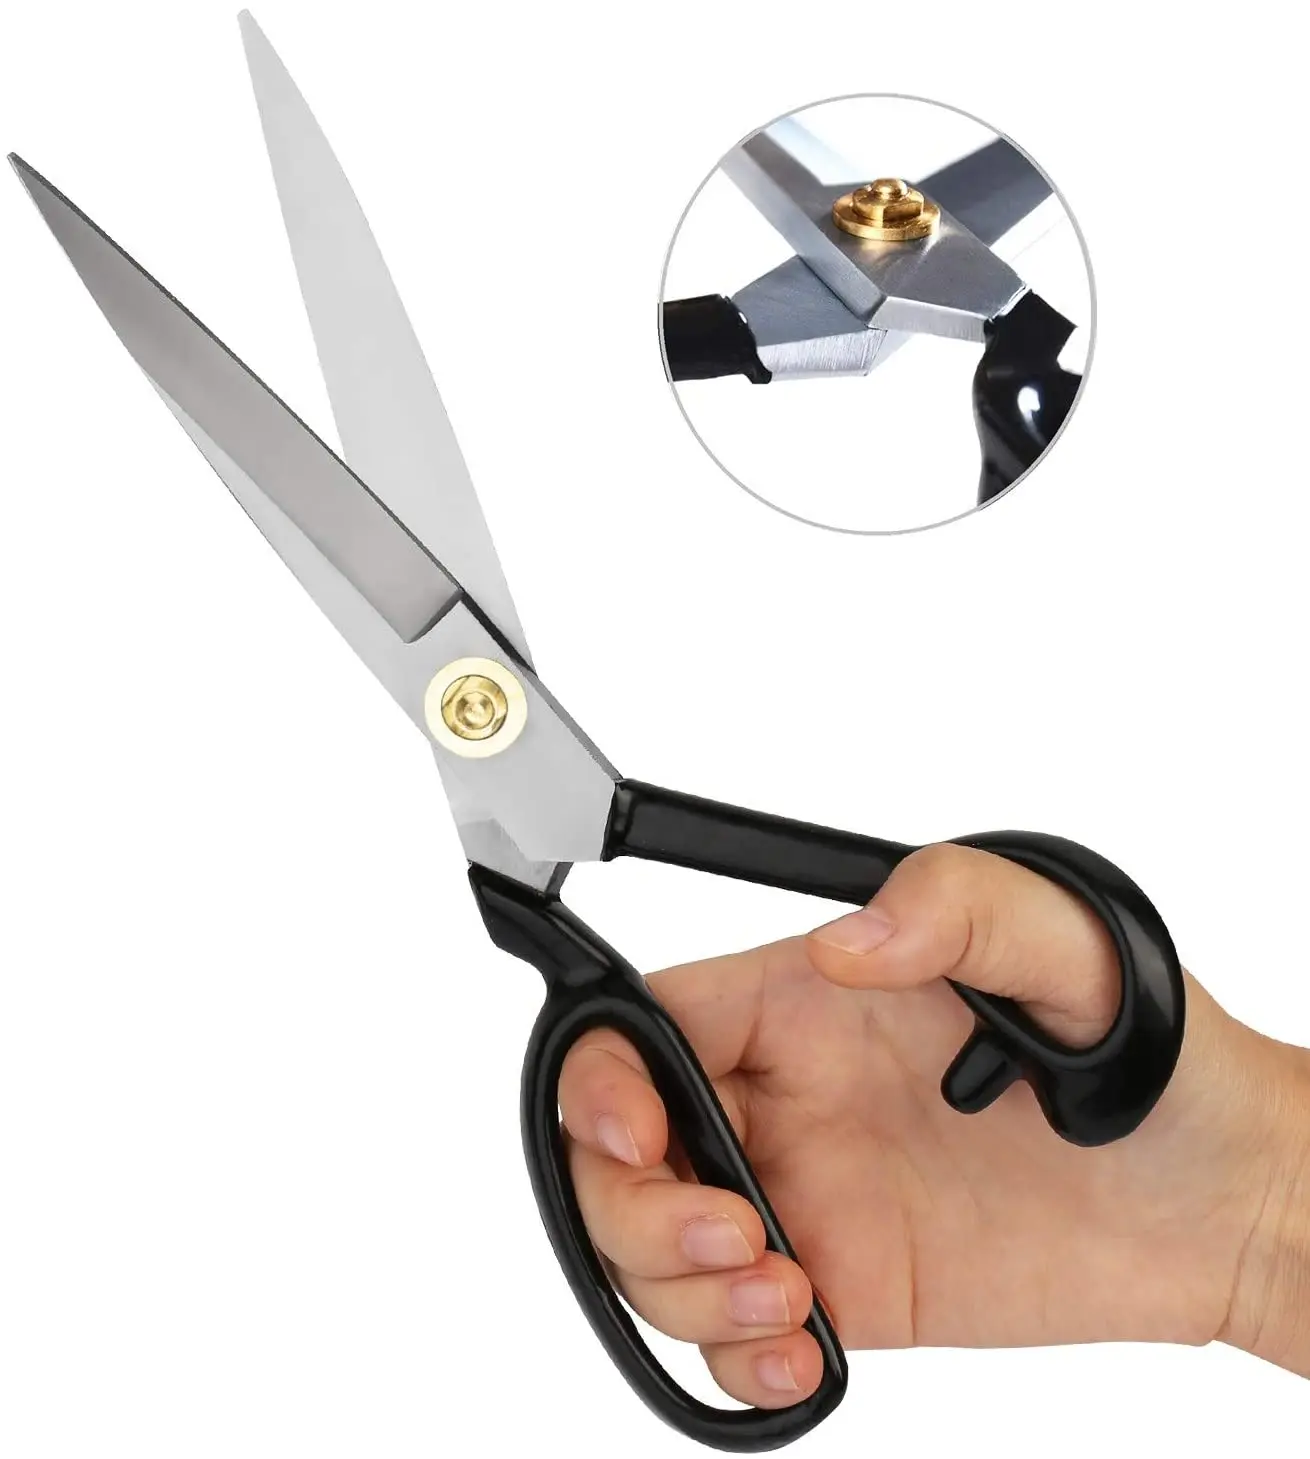 

Crafting Dressmaking Soft Grip Shears Heavy Duty Stainless Steel Sewing Tailor Scissors